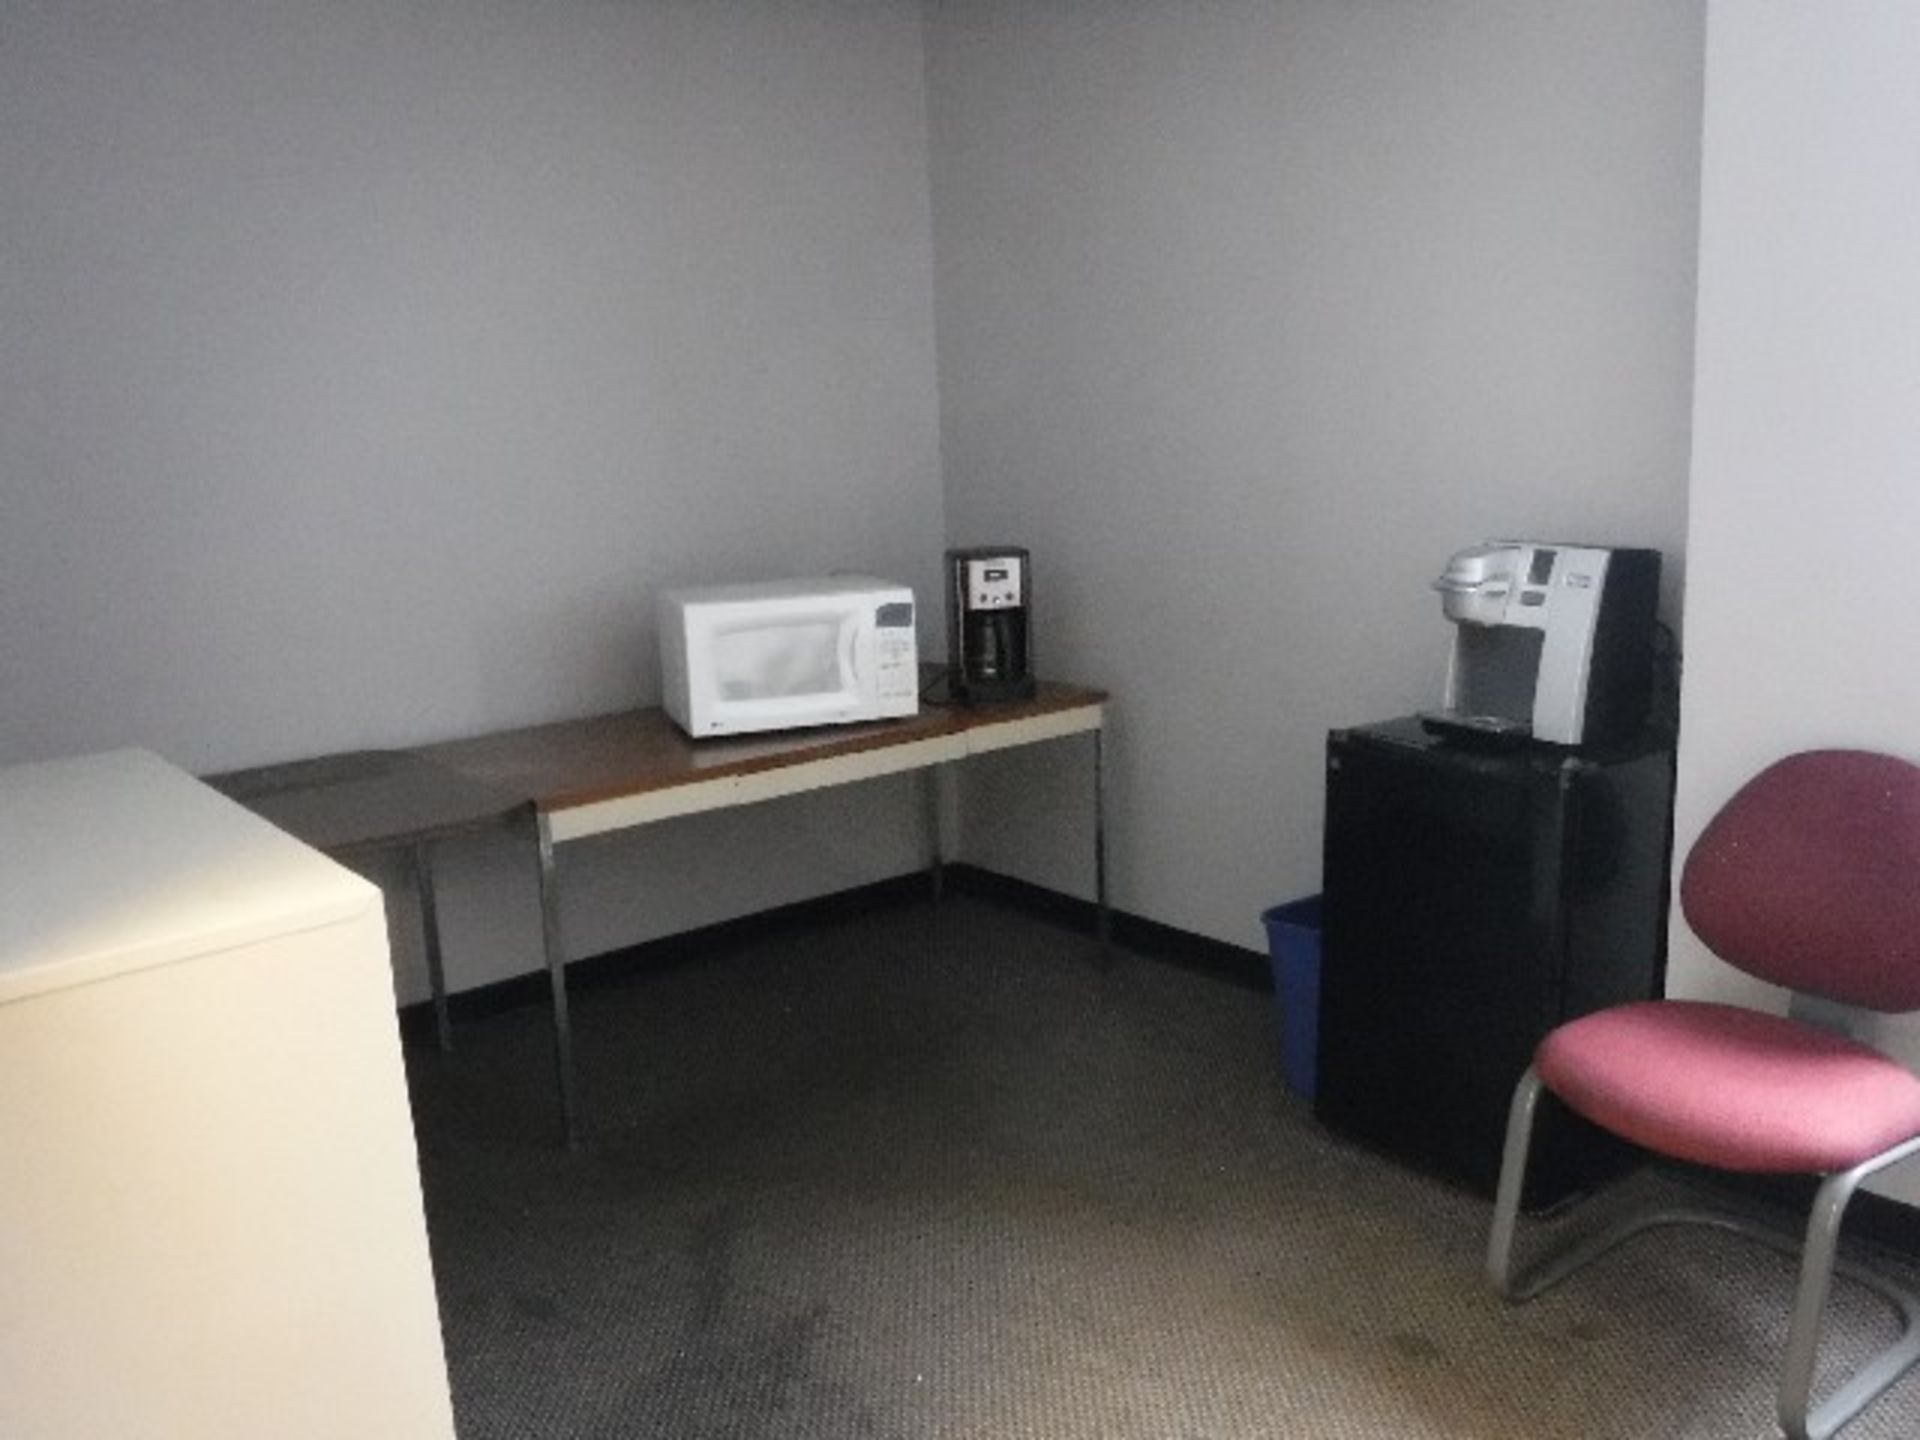 LOT: CONTENTS OF OFFICE